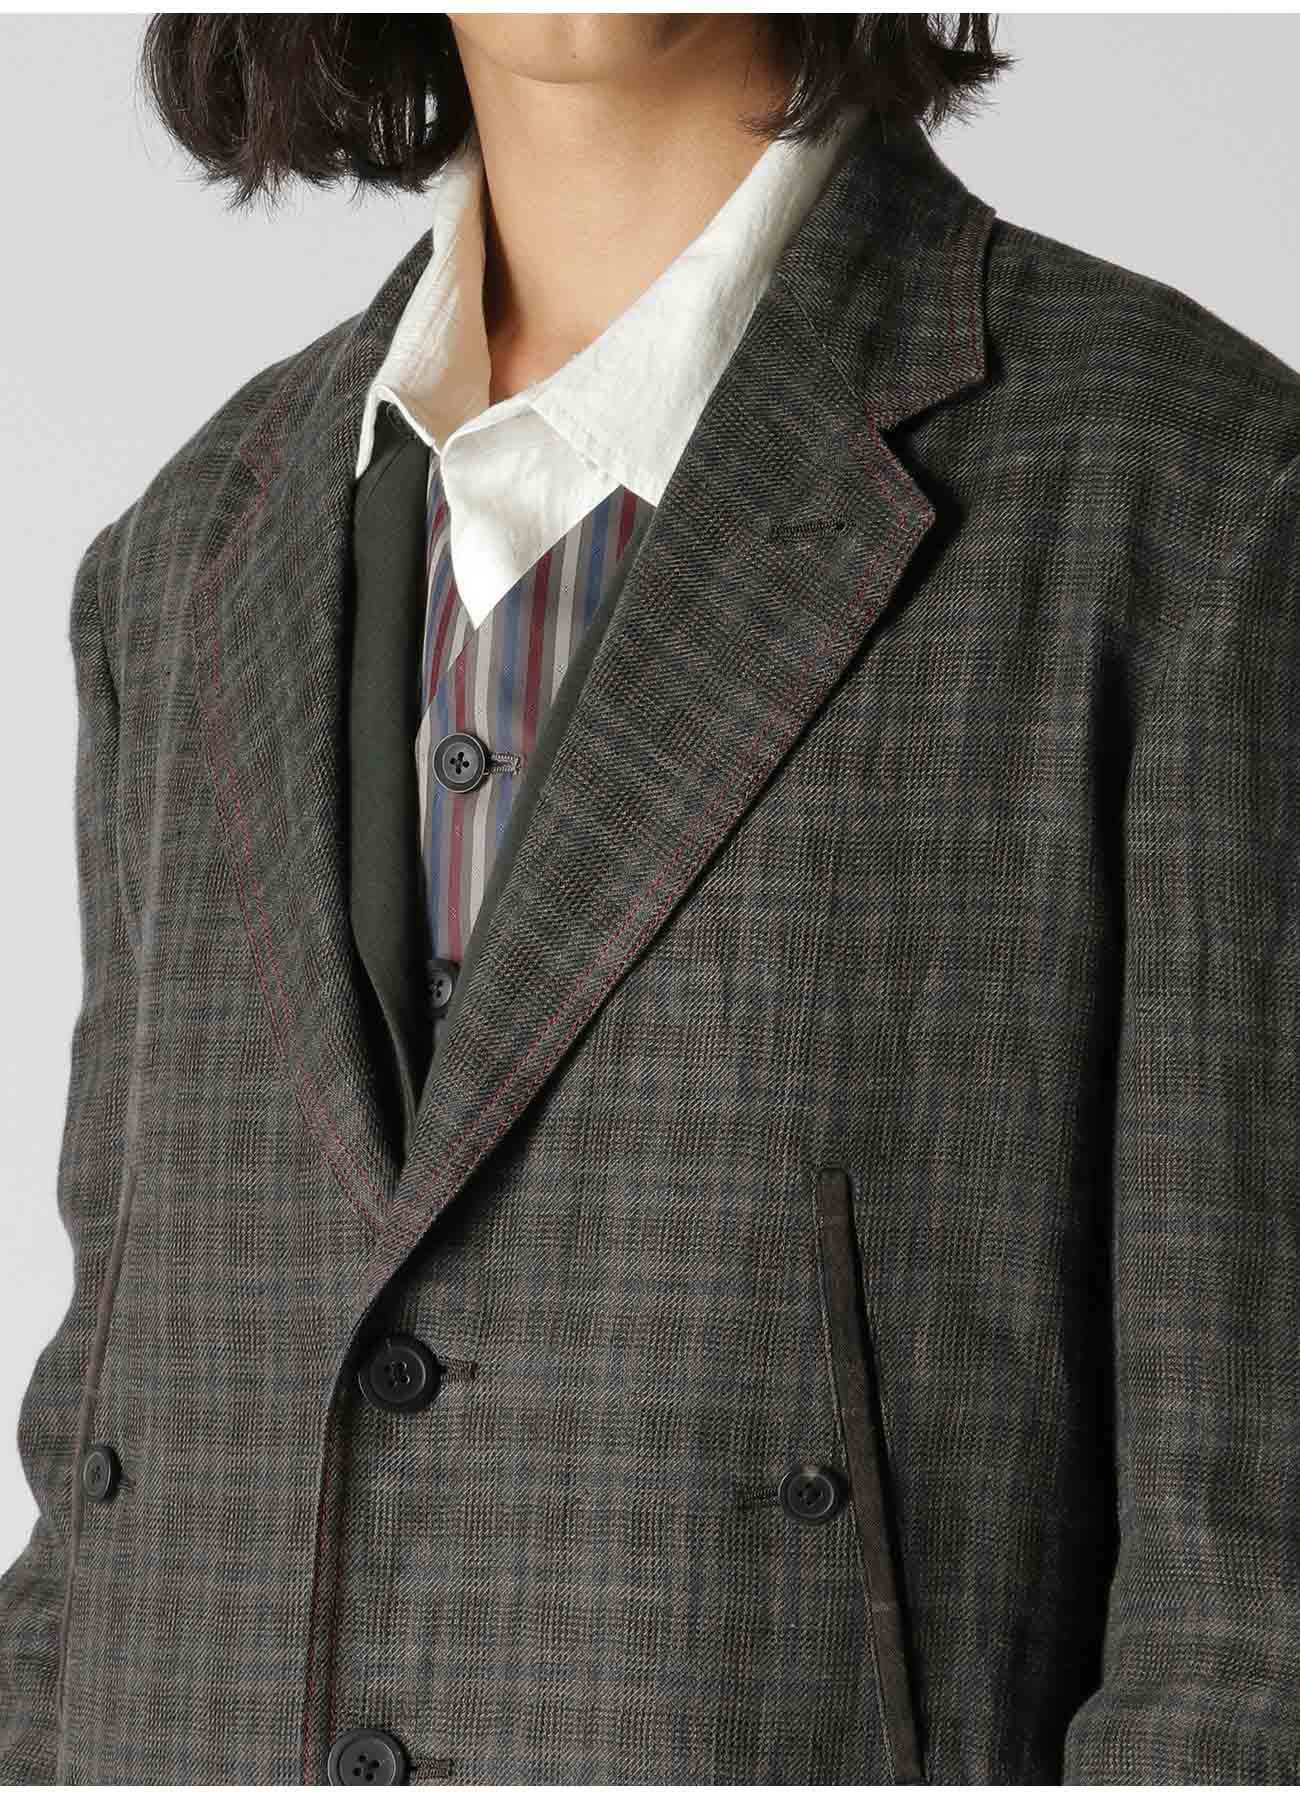 LINEN TWILL PLAID 4-POCKET JACKET WITH RED STITCHING